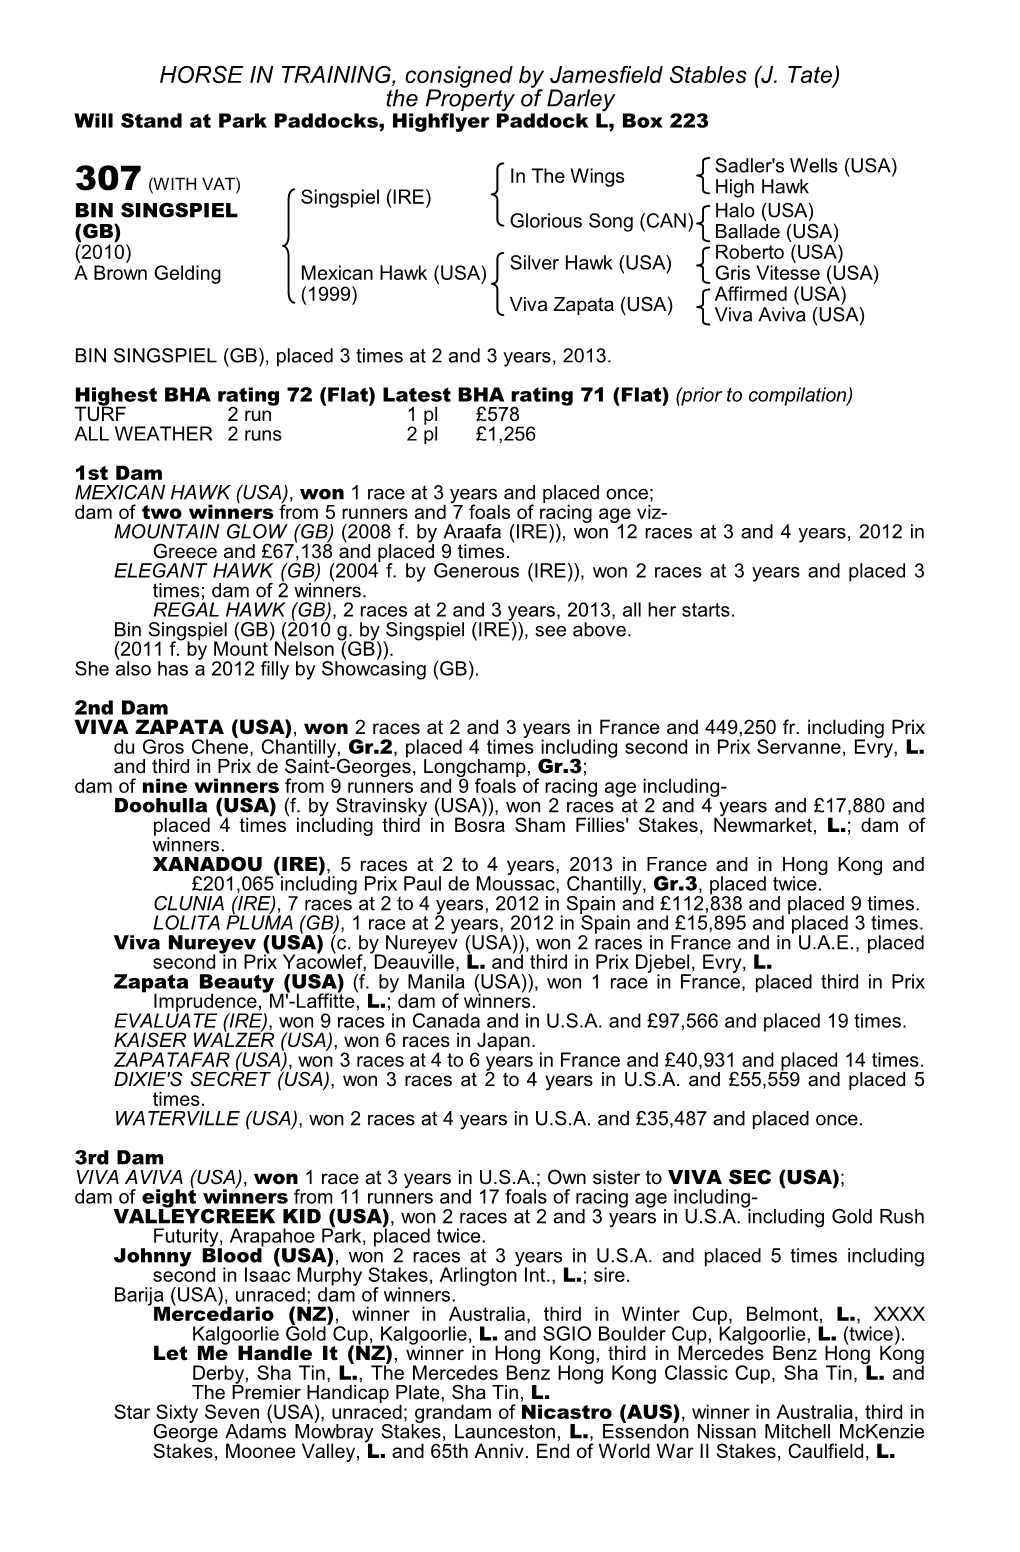 HORSE in TRAINING, Consigned by Jamesfield Stables (J. Tate) the Property of Darley Will Stand at Park Paddocks, Highflyer Paddock L, Box 223